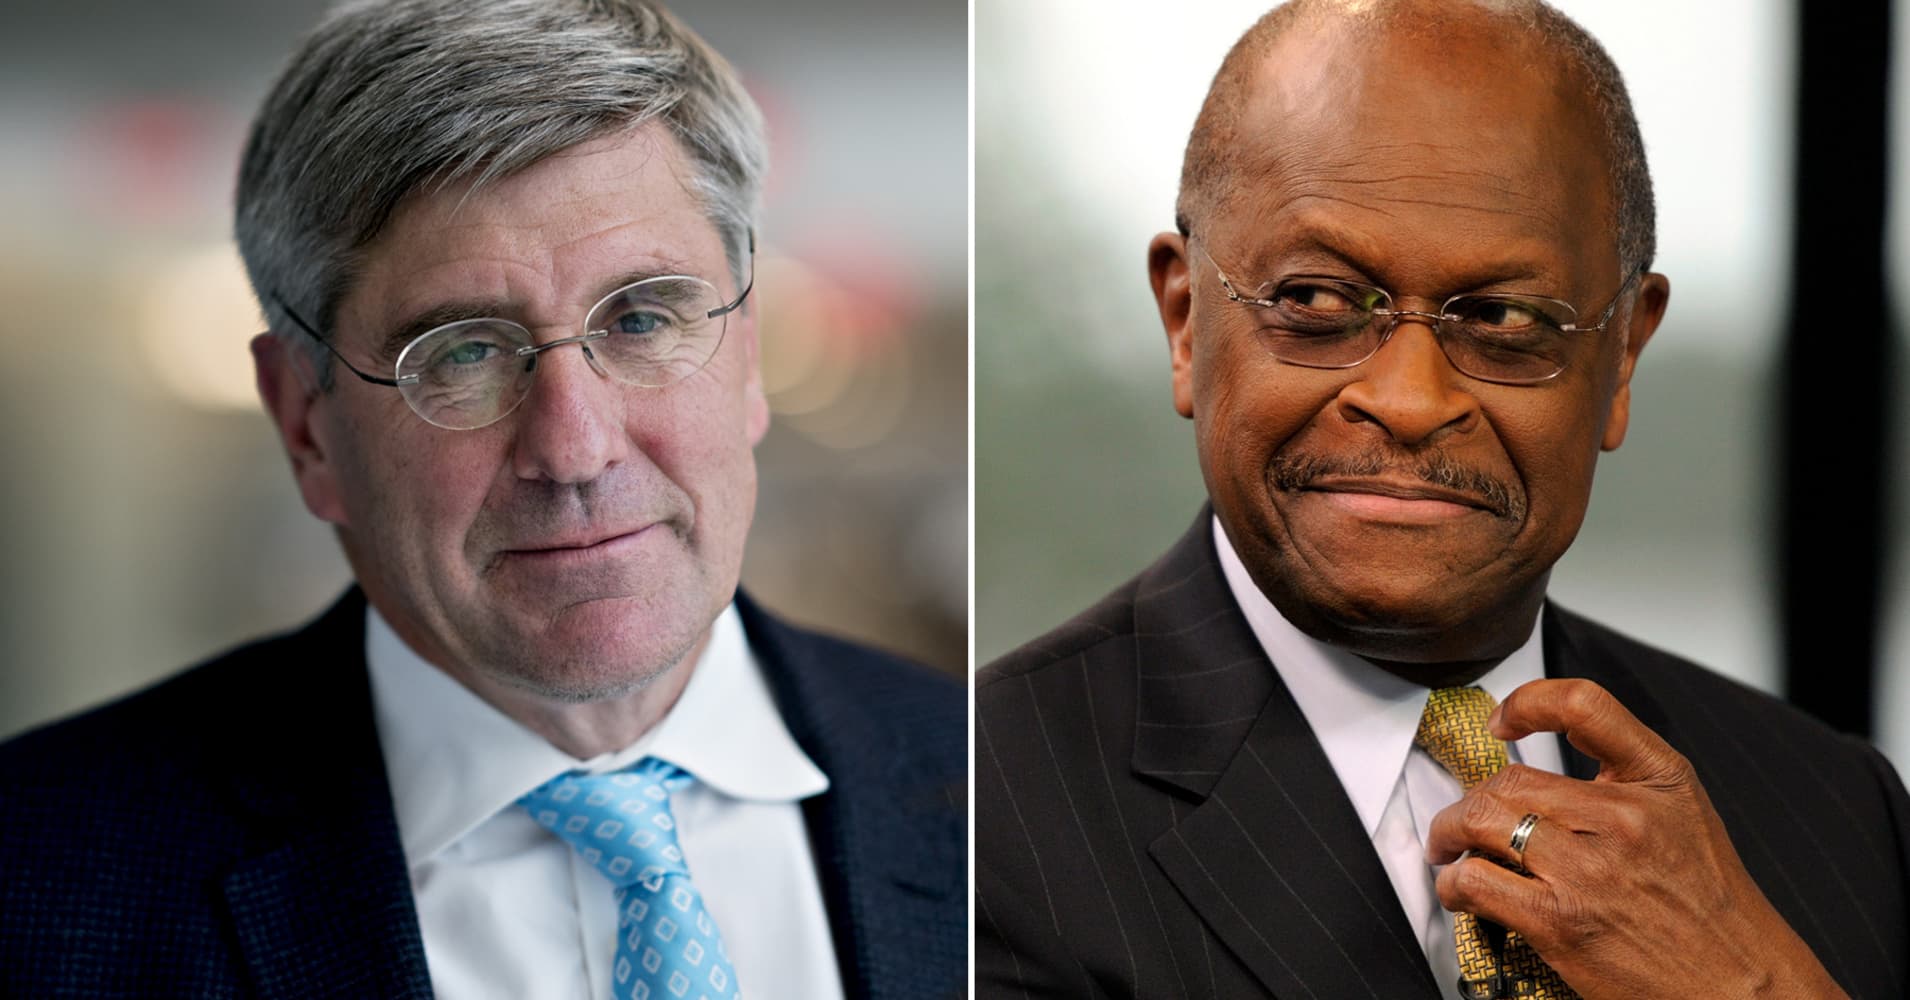 Herman Cain and Stephen Moore are the beginning of Trump's 'politicization' of the Fed: Barclays